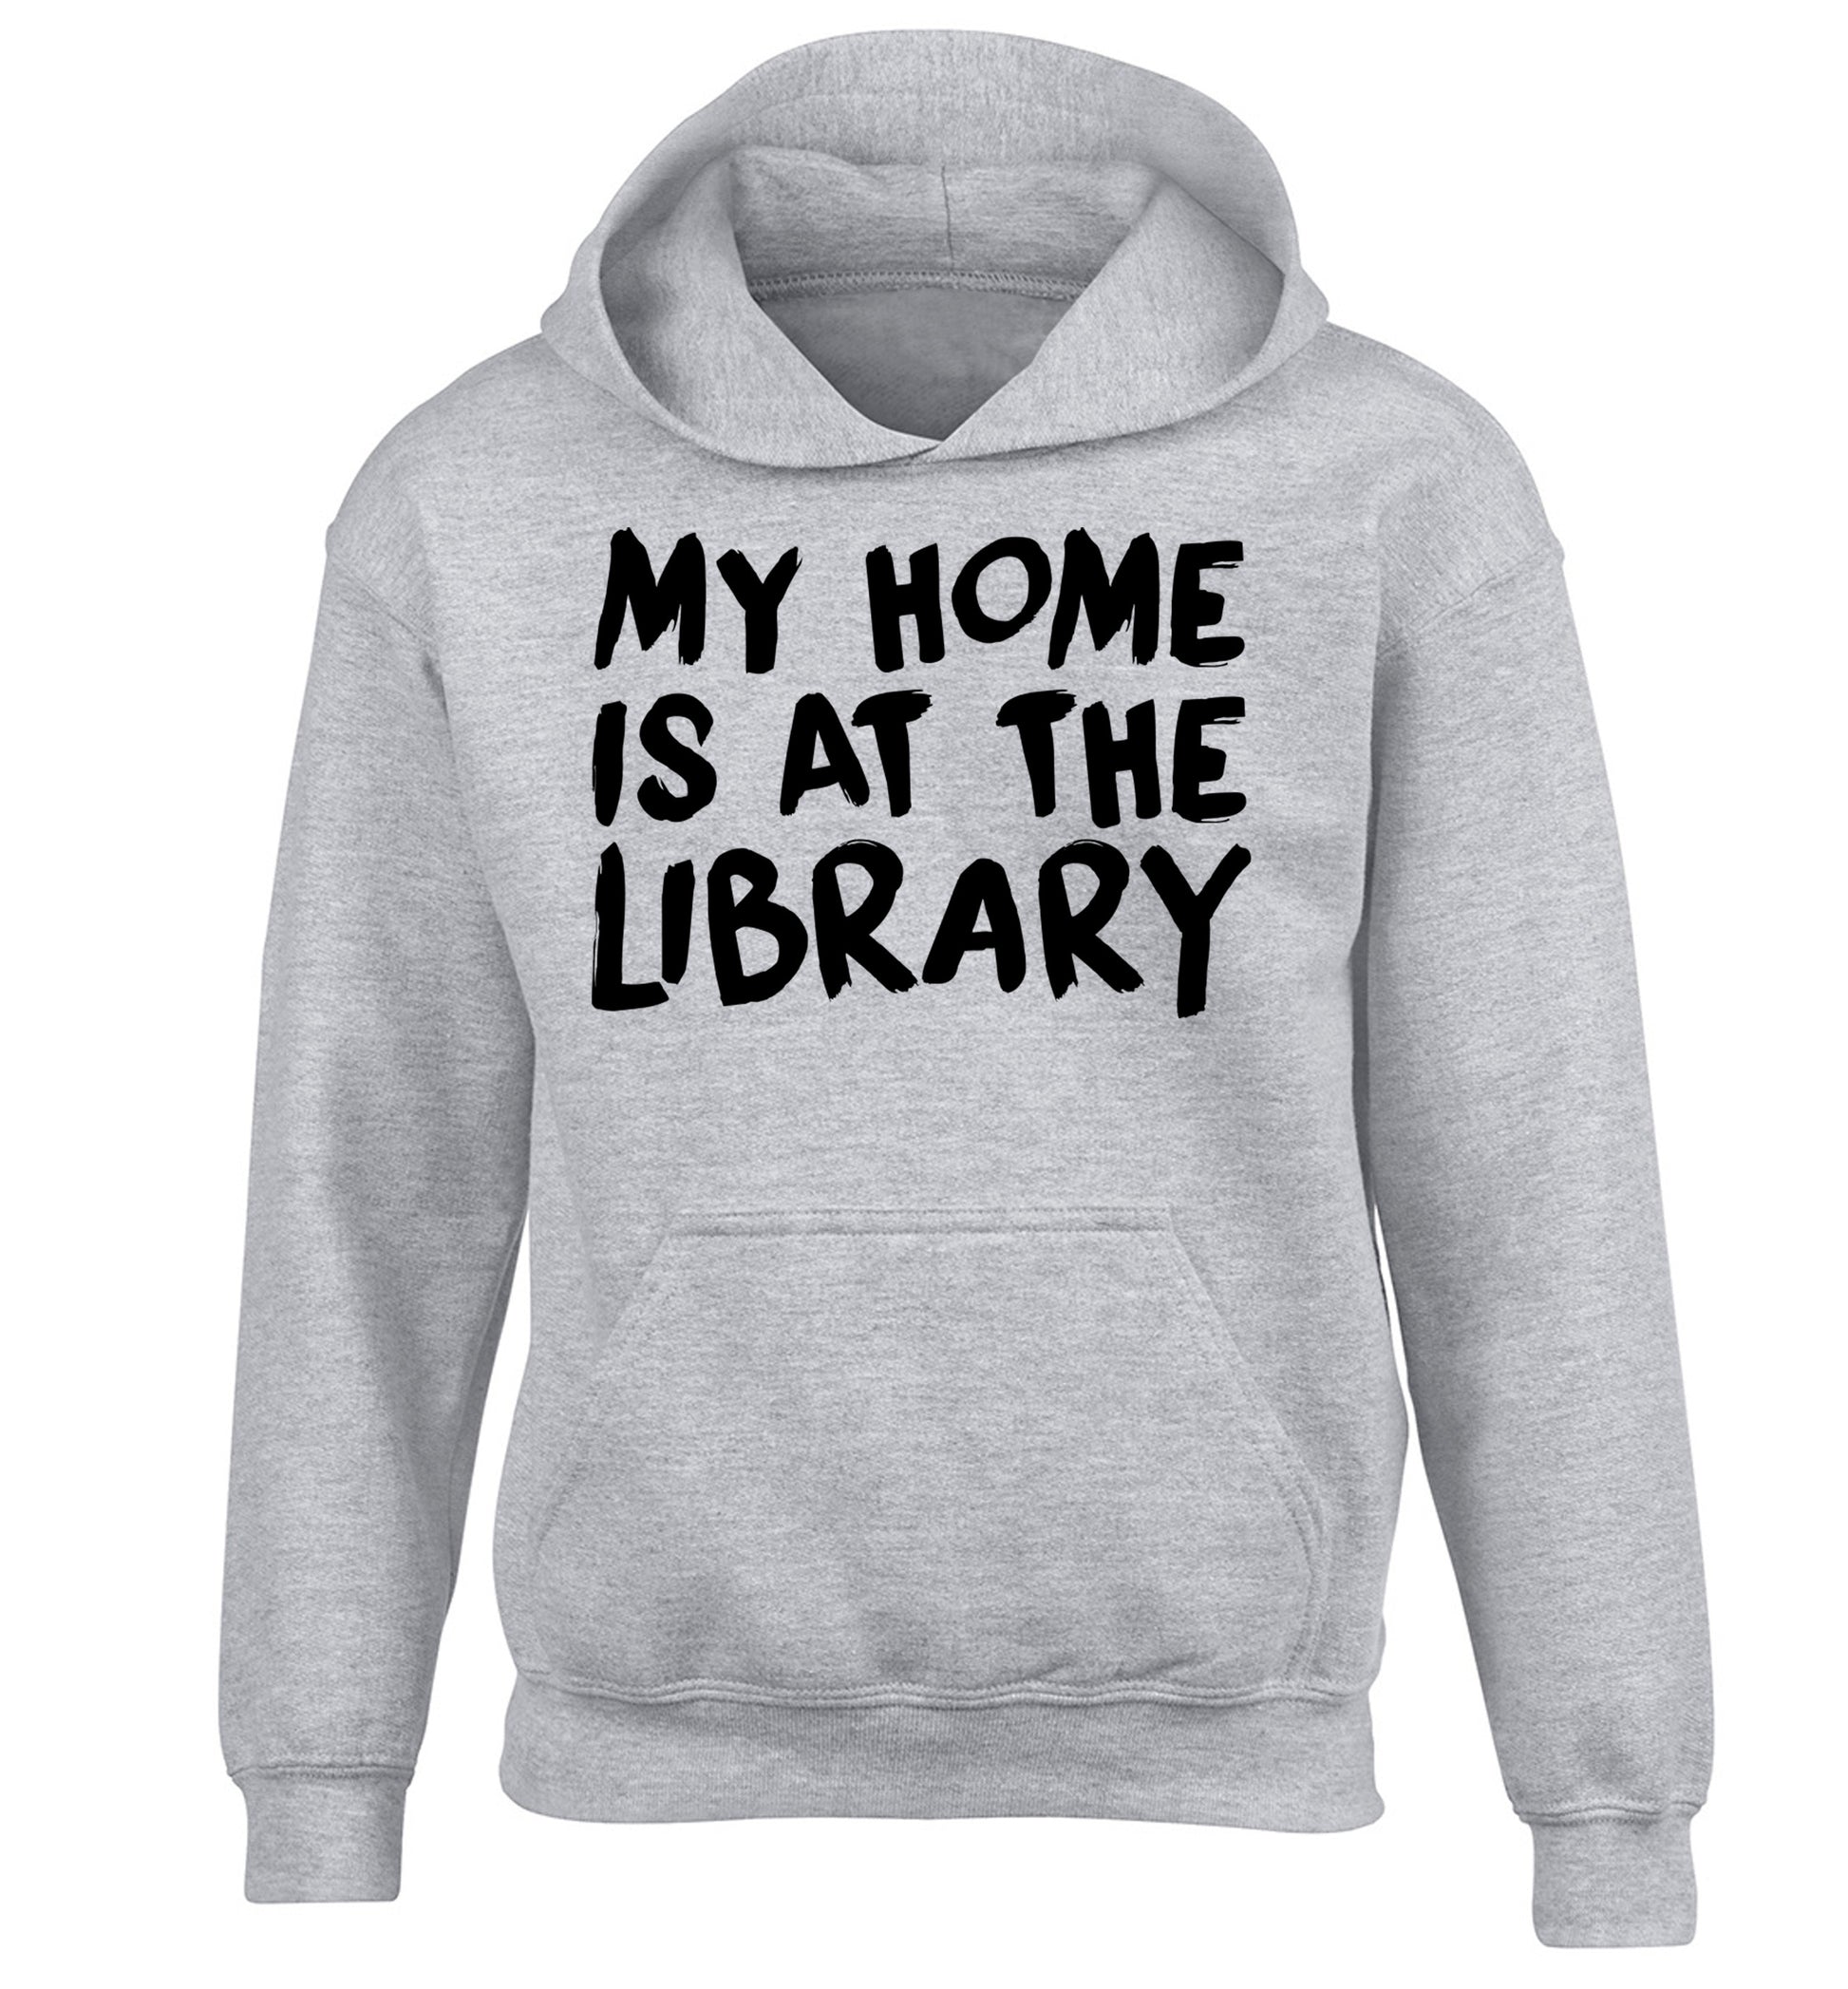 My home is at the library children's grey hoodie 12-14 Years